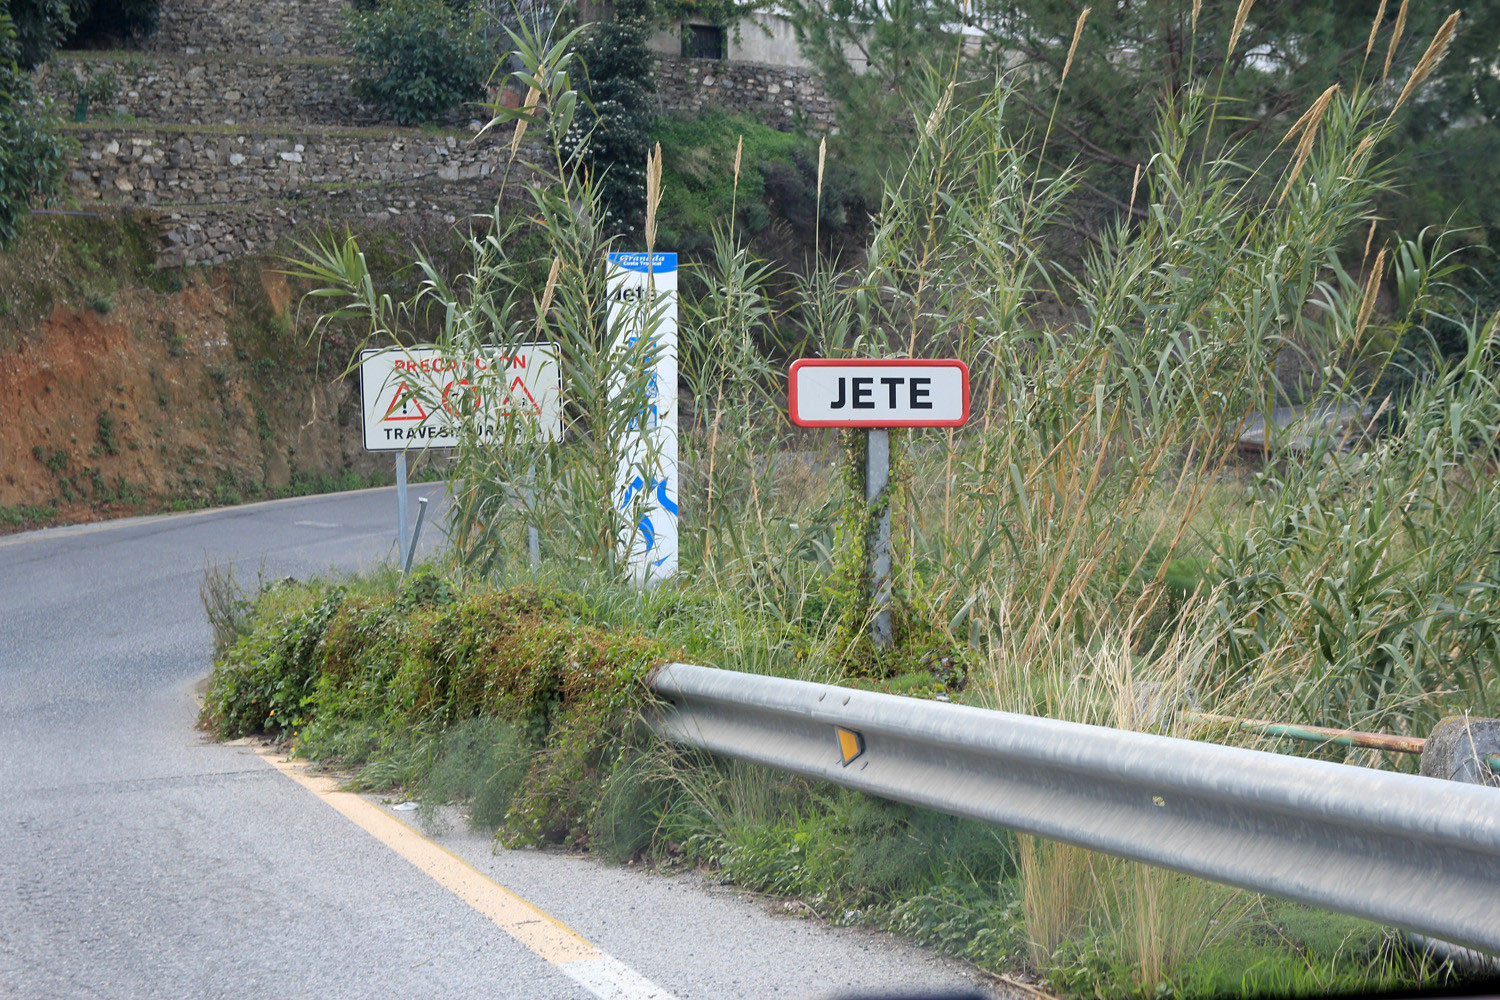 Jete - Exclusive Granada - Exclusive accommodations and excursions in ...